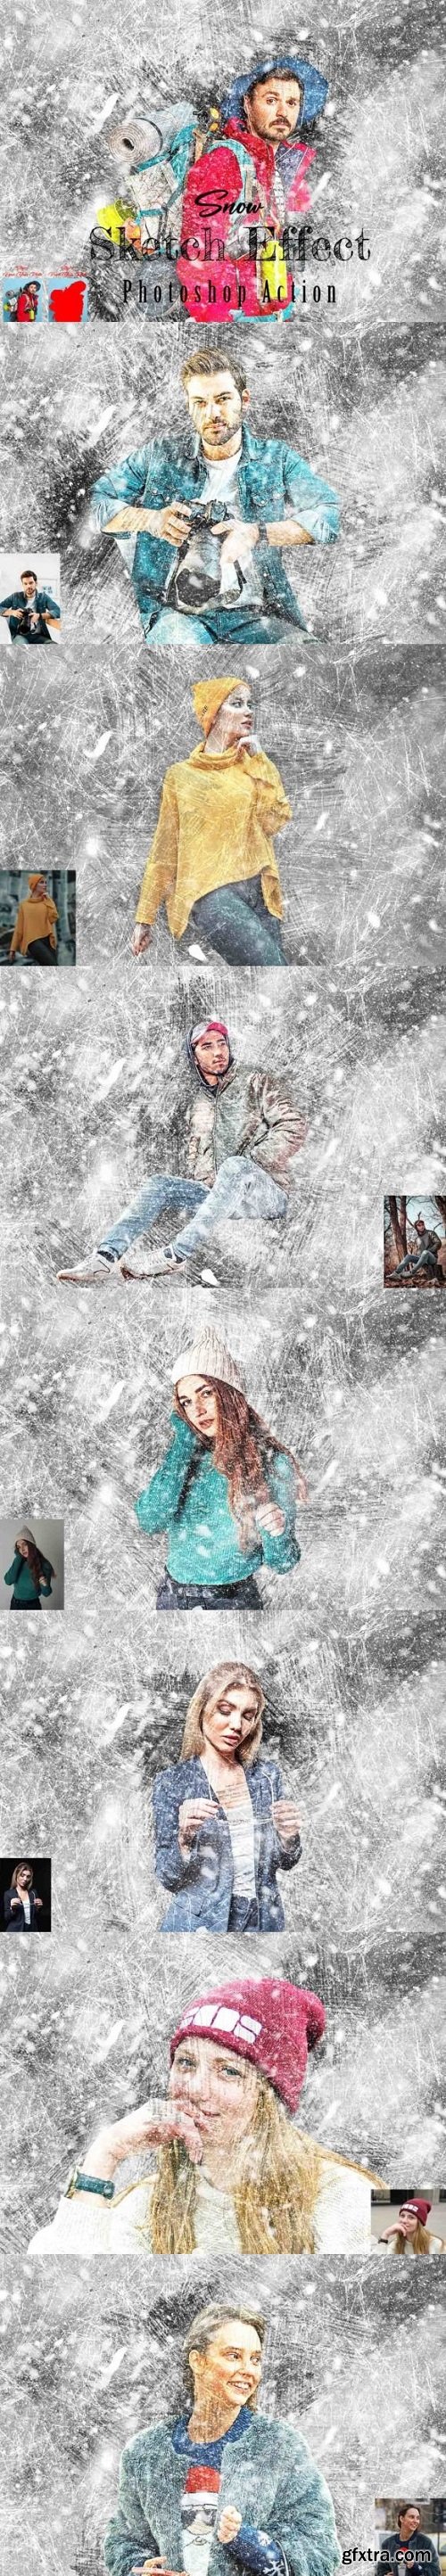 Snow Sketch Effect Photoshop Action